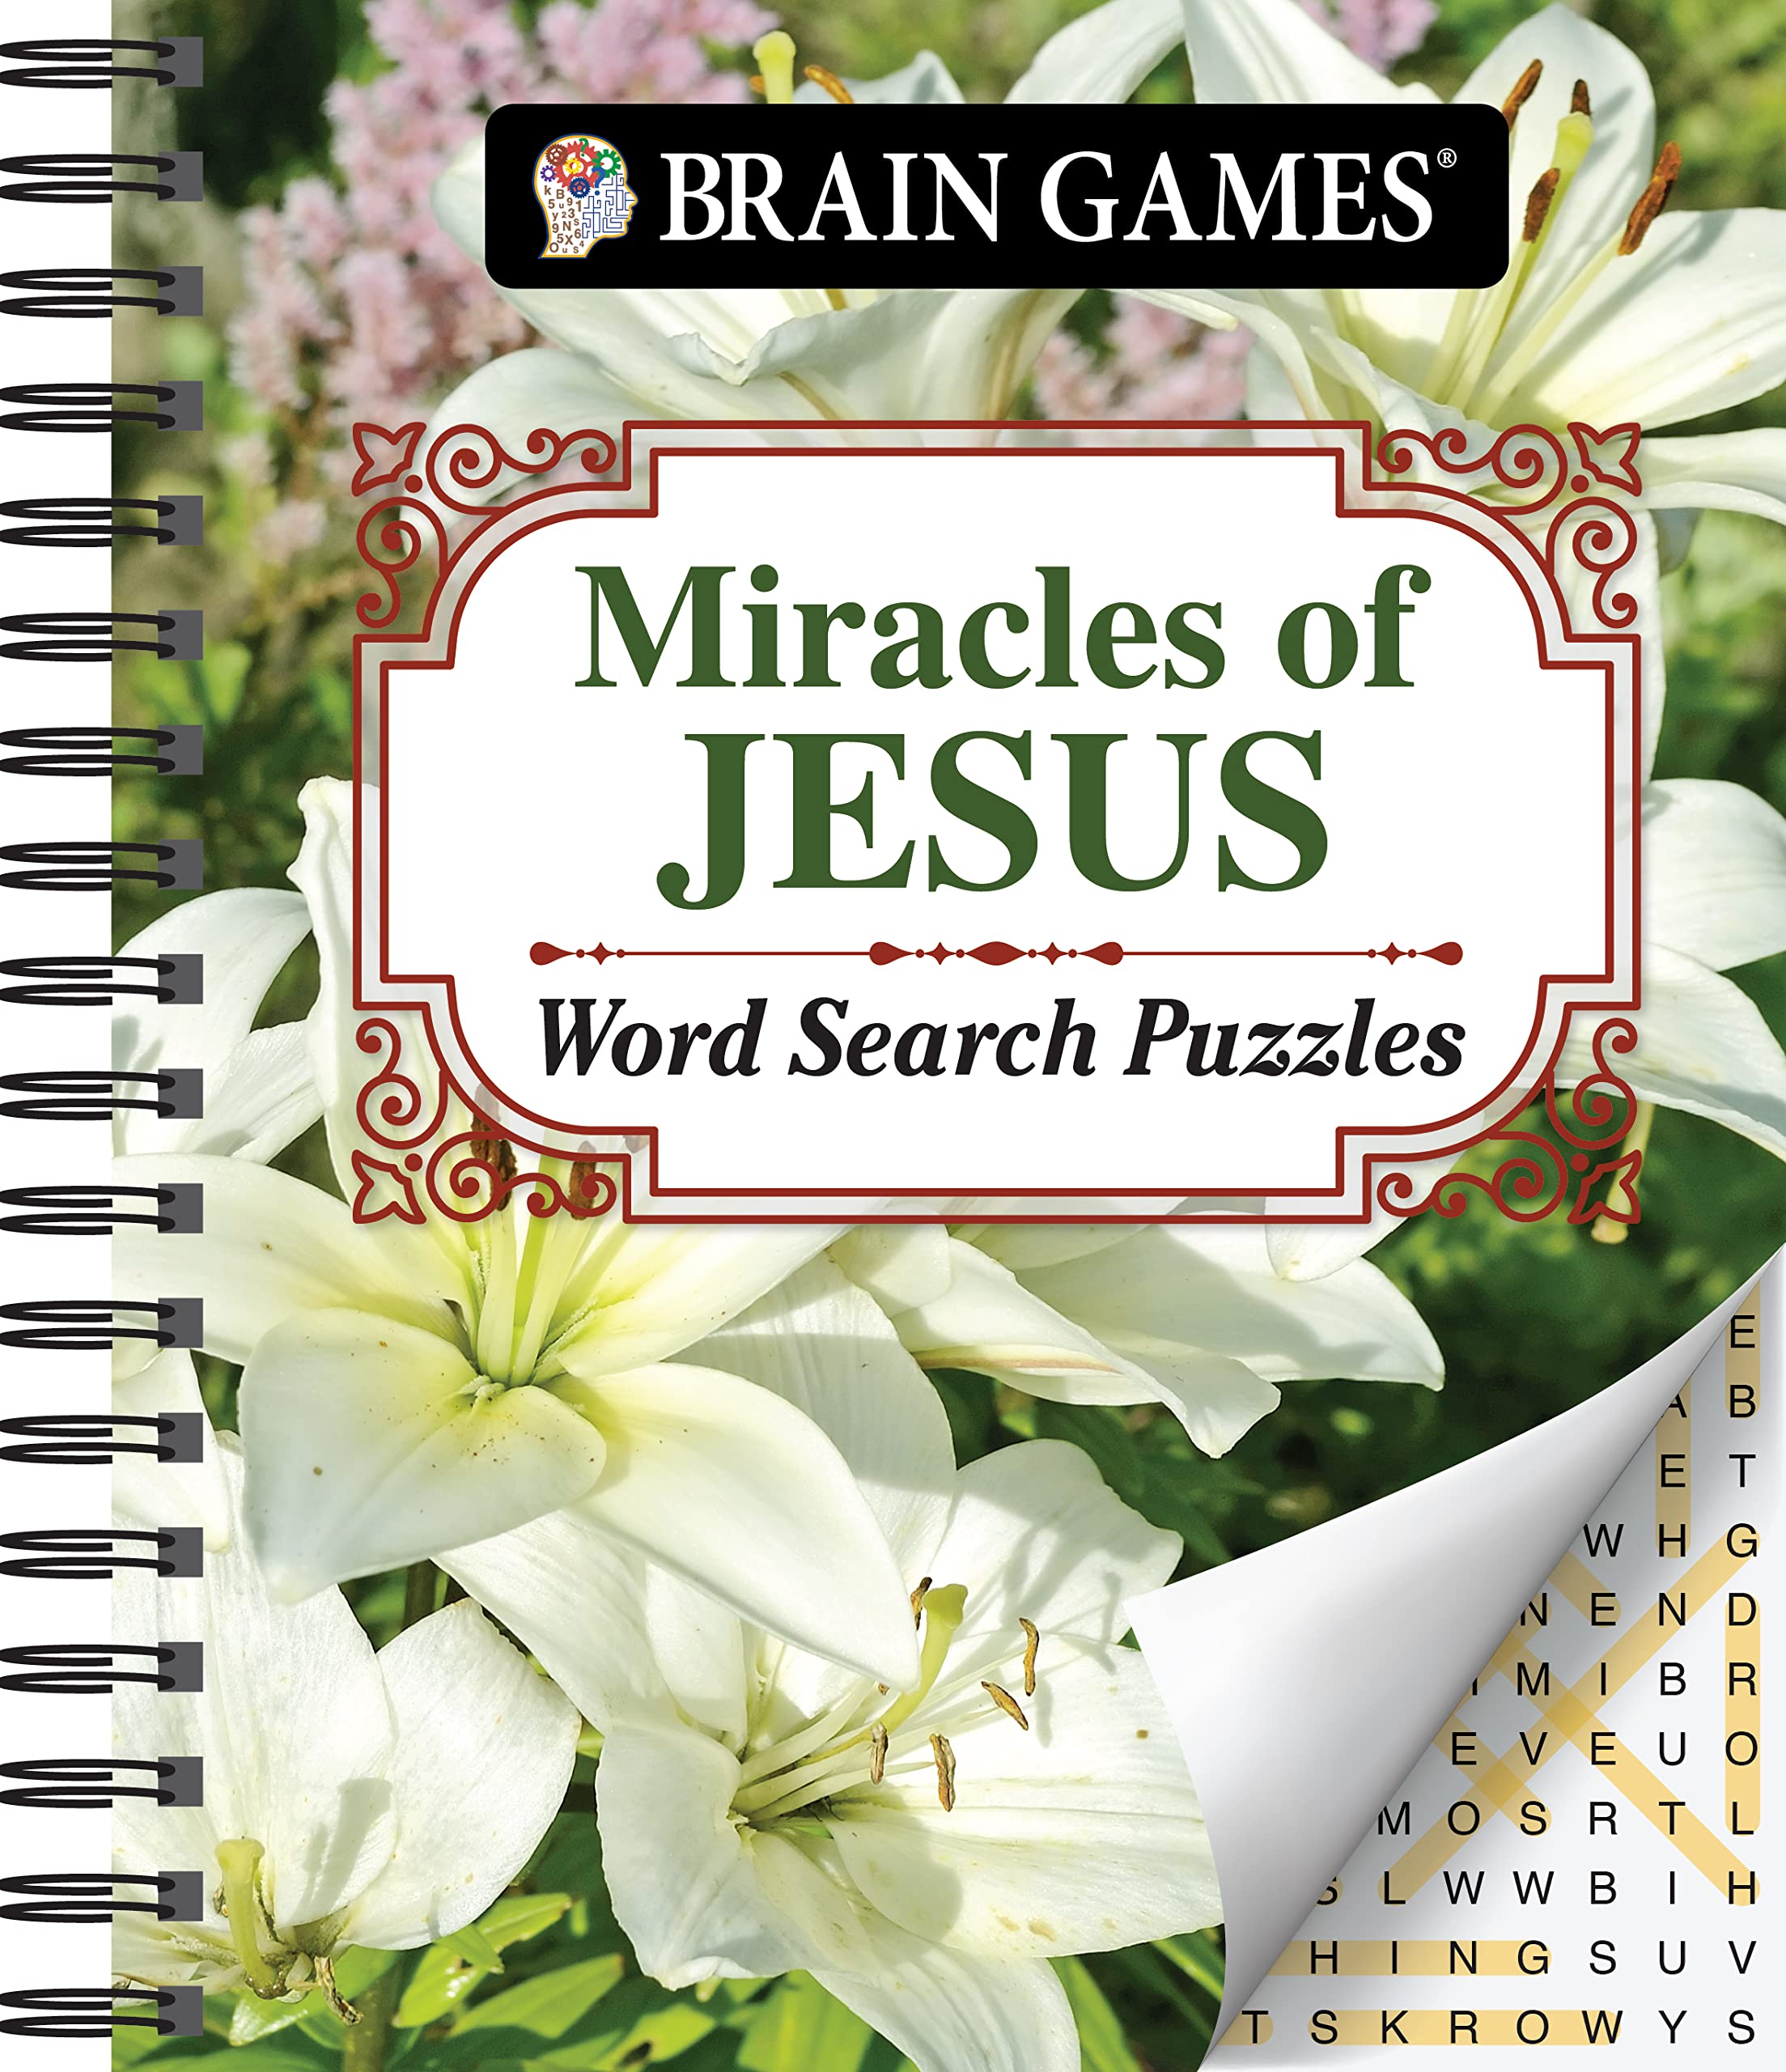 Brain Games - Miracles of Jesus Word Search Puzzles (Brain Games - Bib ...